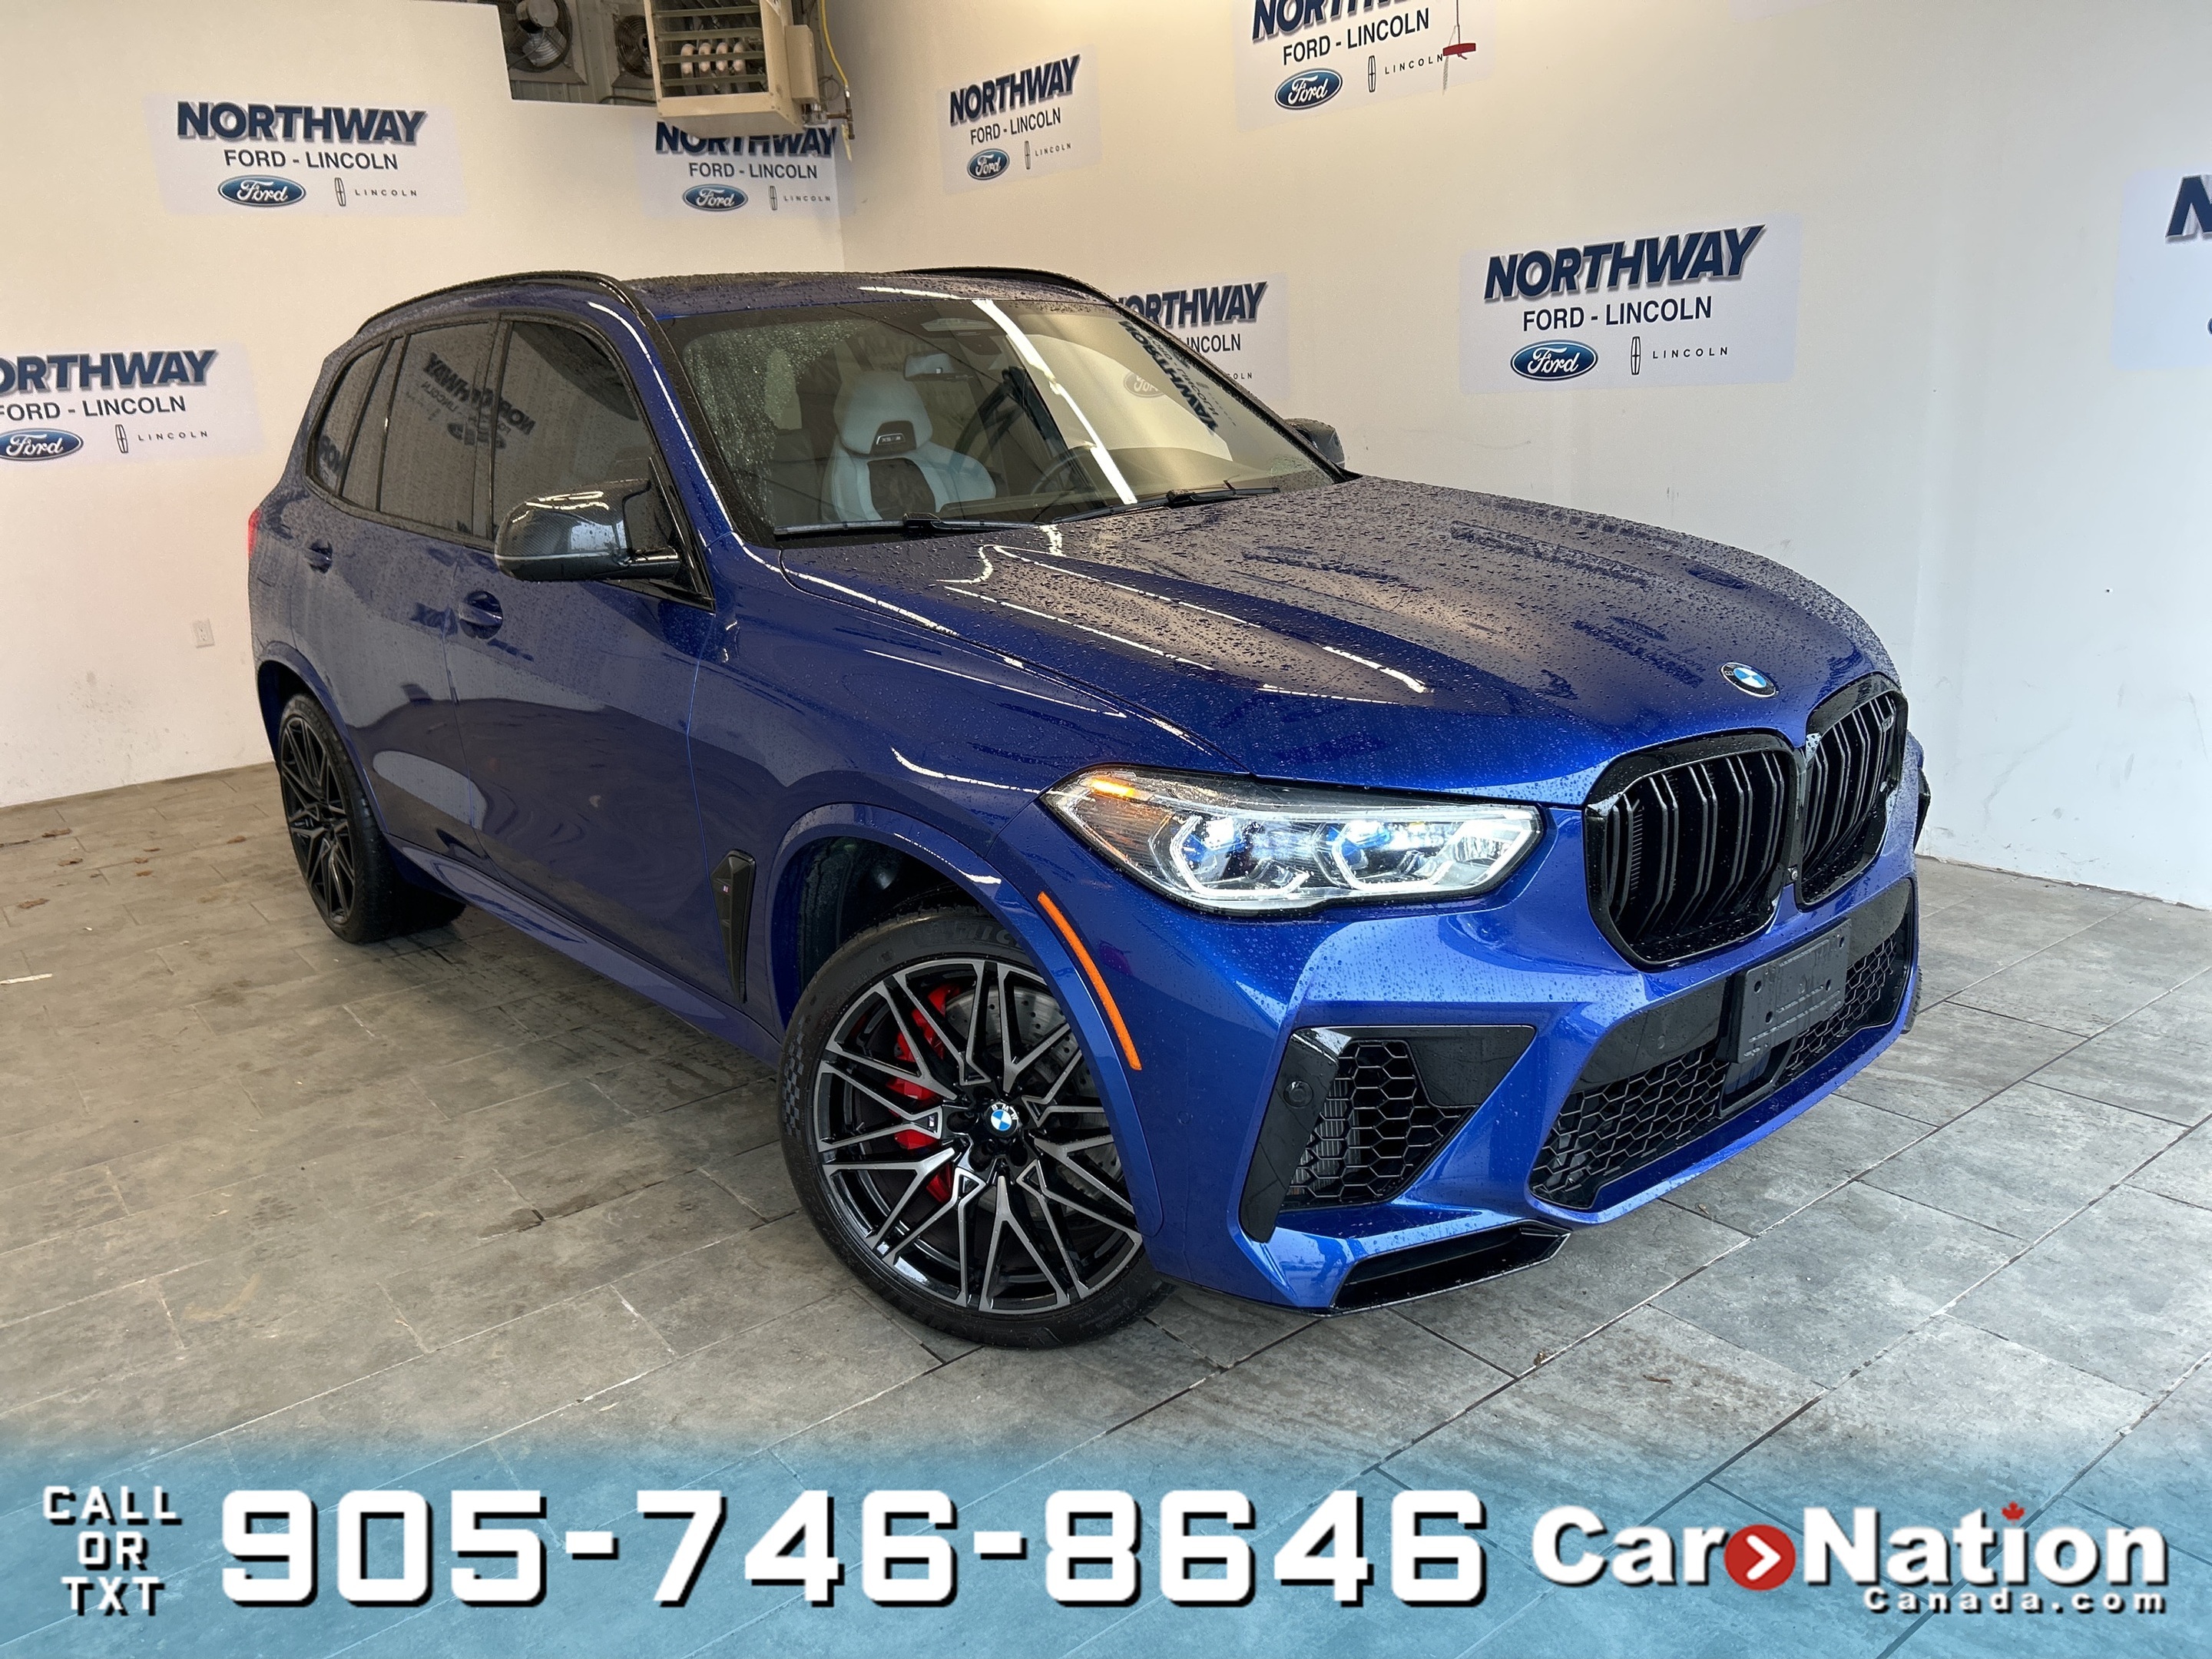 2021 BMW X5 M M COMPETITION | AWD | 617HP | OPTIONS LISTED BELOW